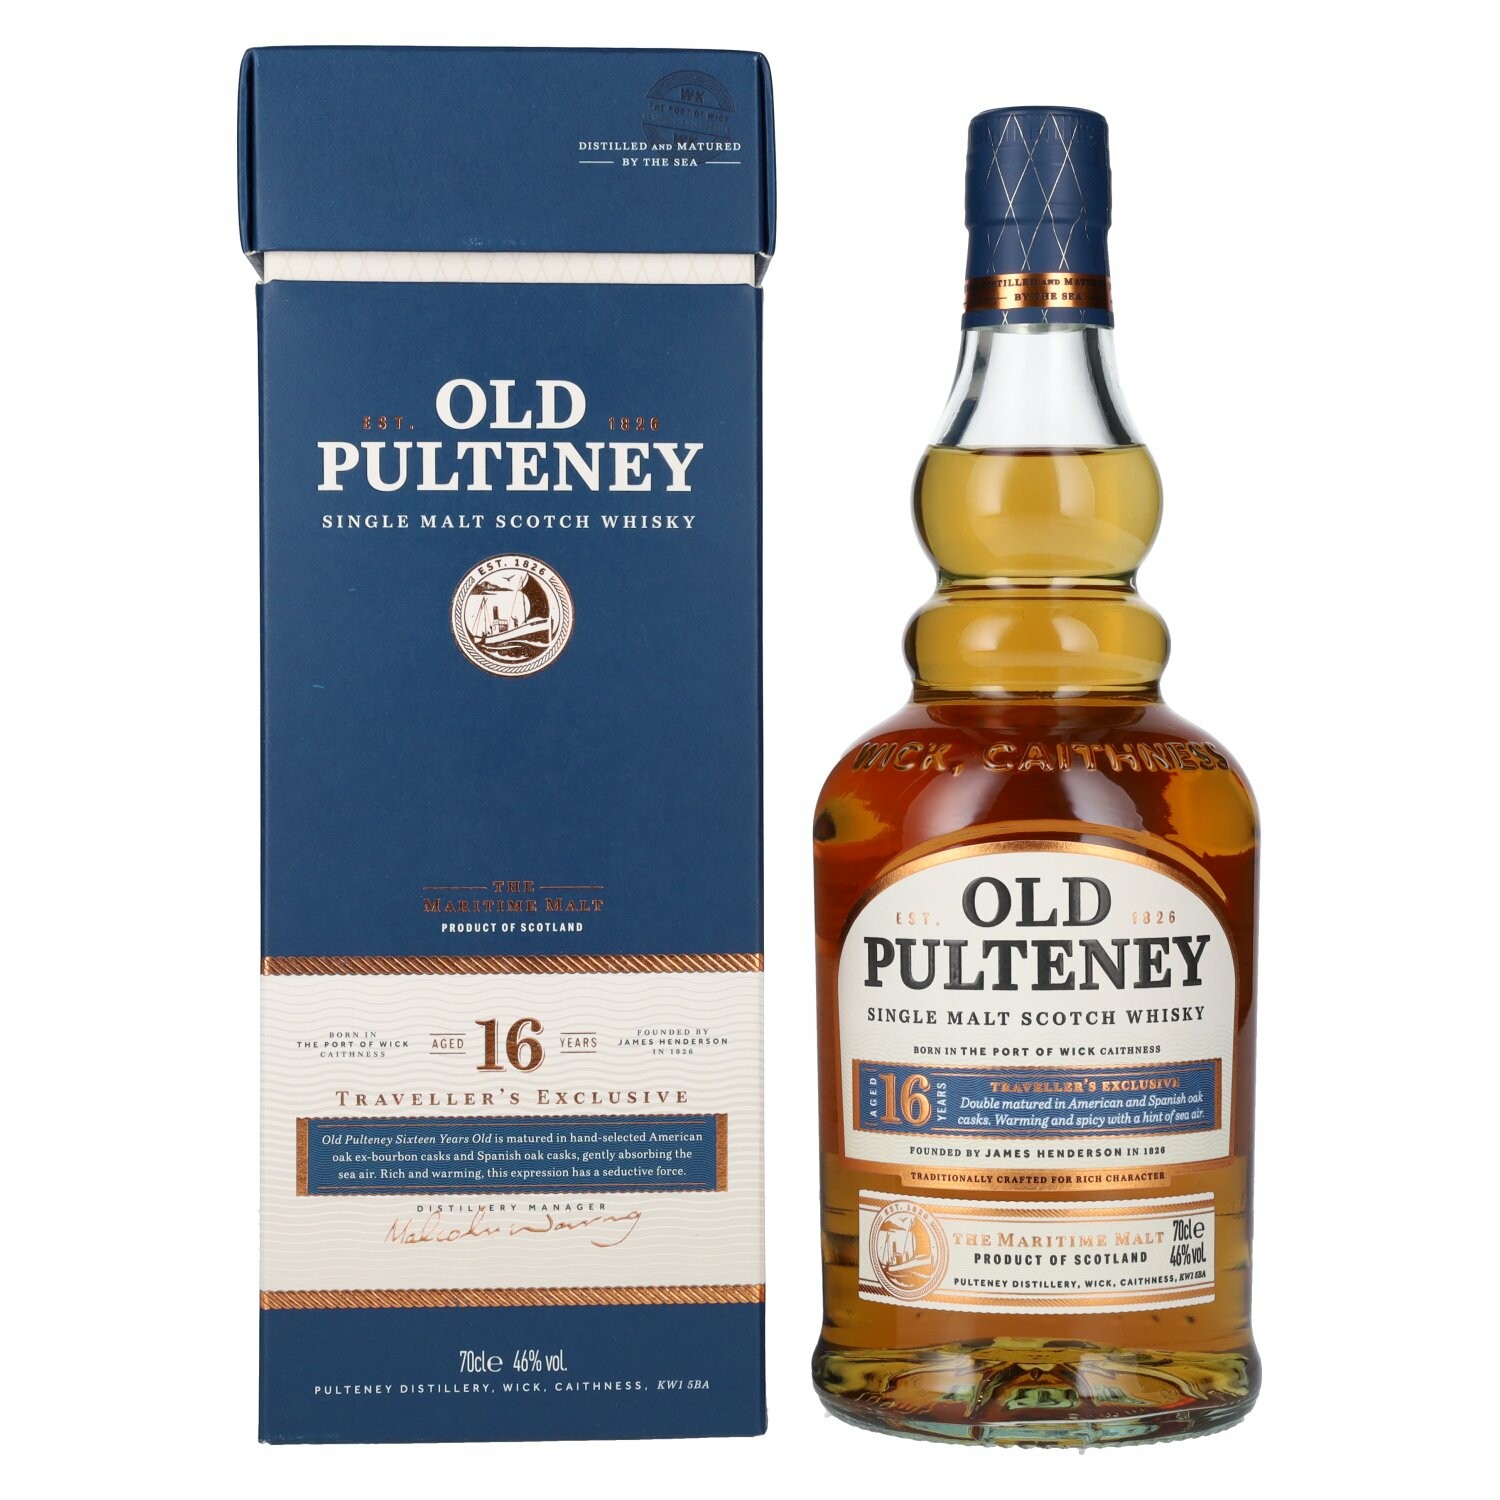 Old Pulteney 16 Years Old Single Malt TRAVELLER'S EXCLUSIVE 46% Vol. 0,7l in Giftbox